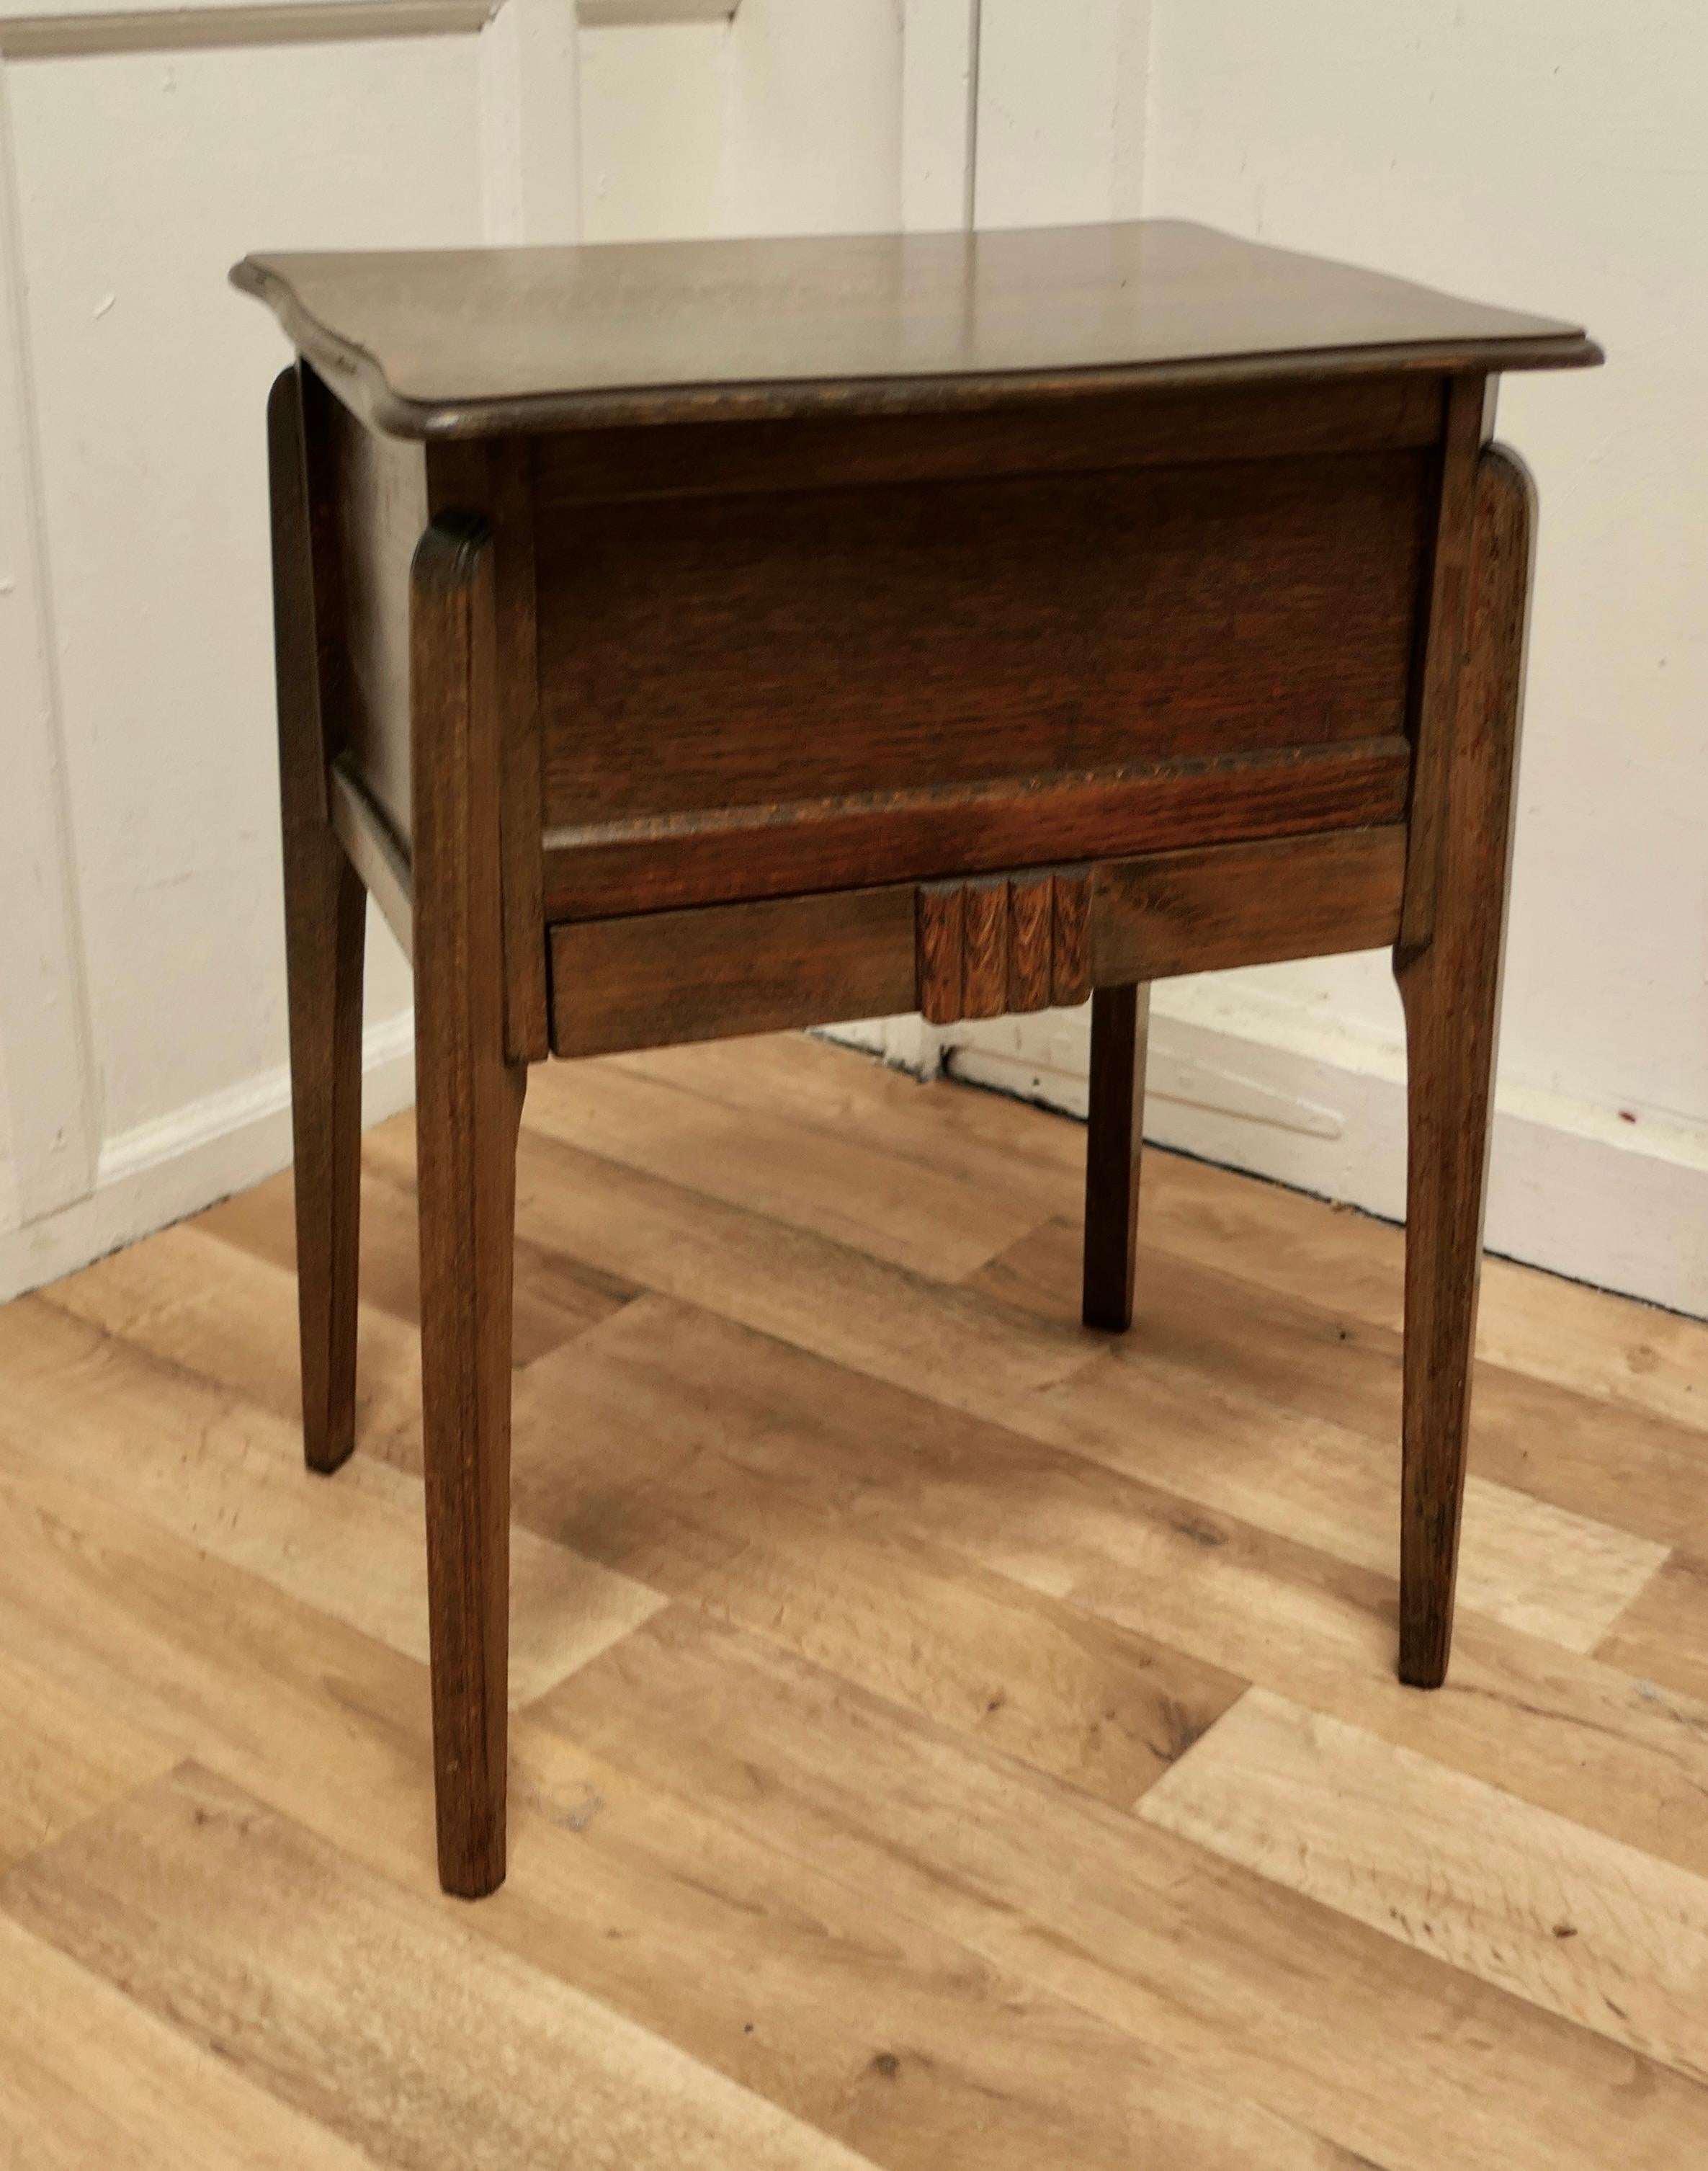 1930s Oak sewing box table by Morco

This is a good sturdy side table, with a good colour, just open the top to find a pleated yellow lining and a pin cushion in the lid with and a drawer for reels of thread underneath all in good condition for